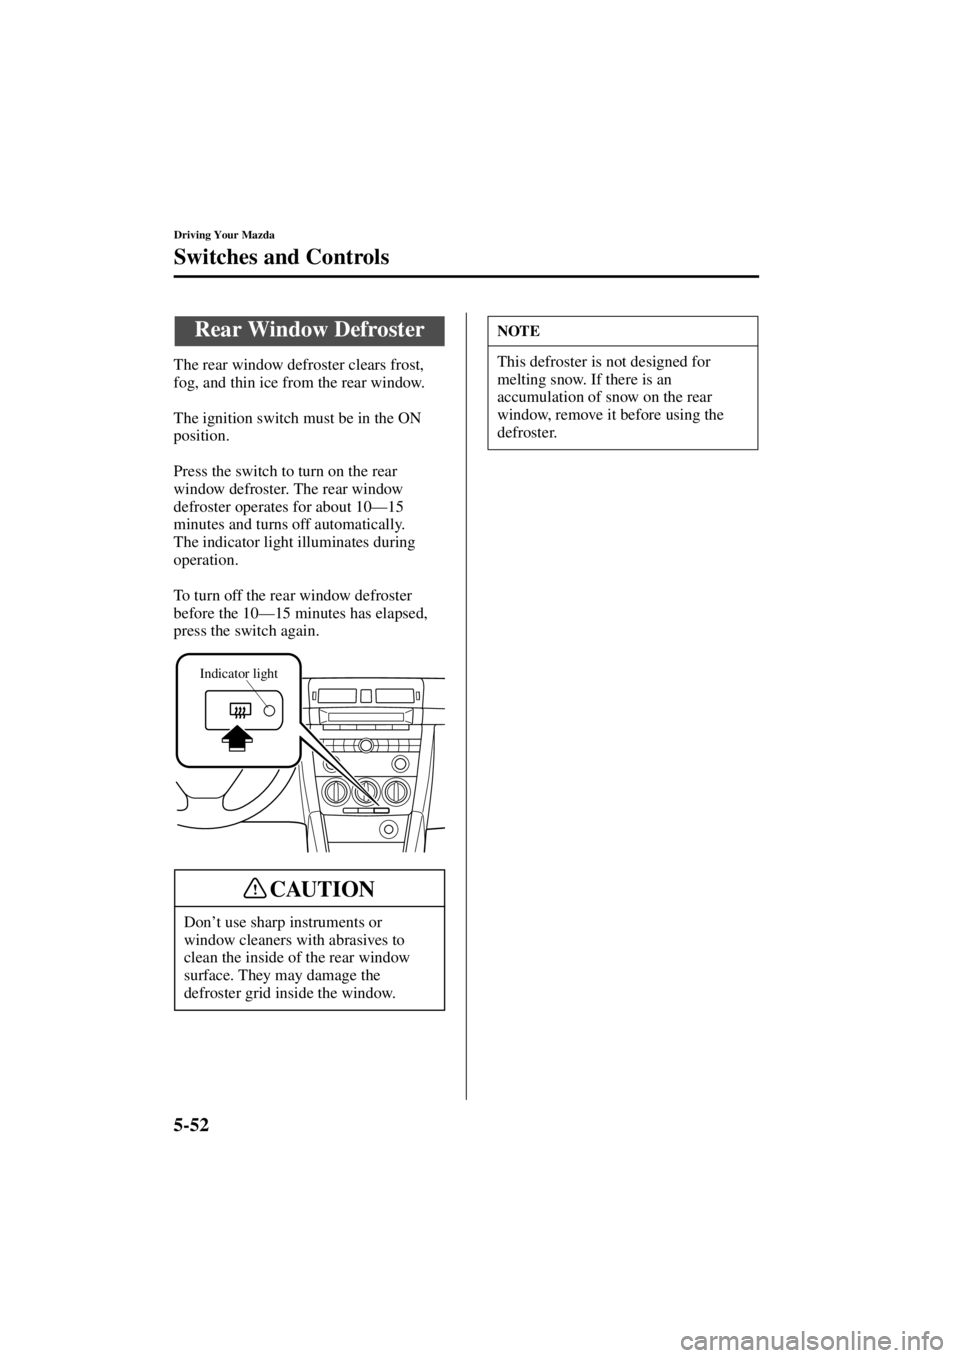 MAZDA MODEL 3 4-DOOR 2004  Owners Manual 5-52
Driving Your Mazda
Switches and Controls
Form No. 8S18-EA-03I
The rear window defroster clears frost, 
fog, and thin ice from the rear window.
The ignition switch must be in the ON 
position.
Pre